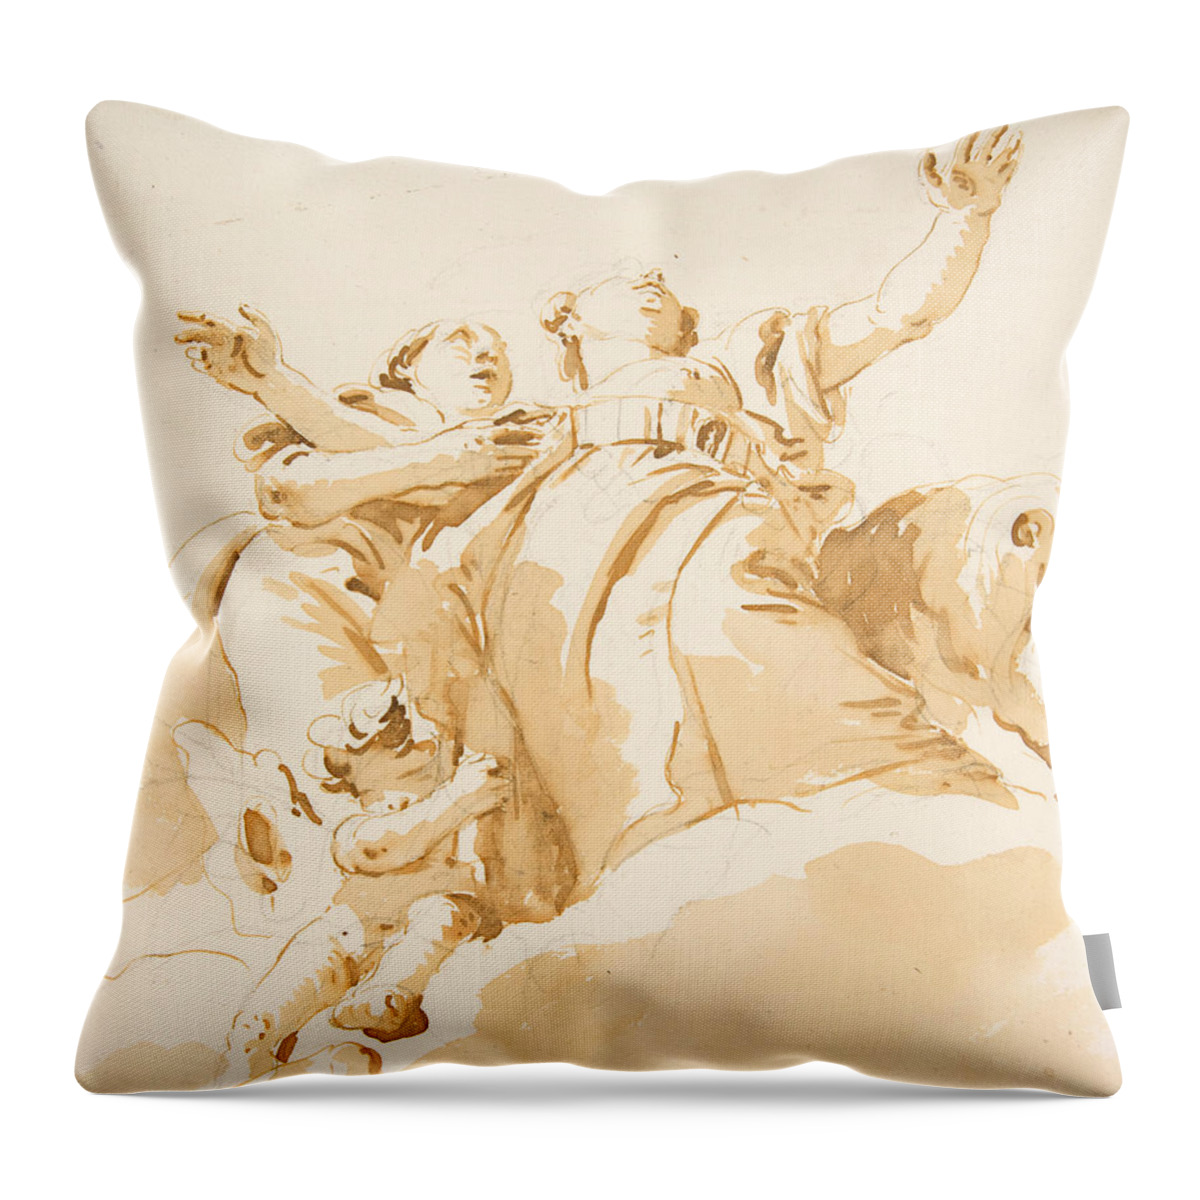 18th Century Art Throw Pillow featuring the drawing Two Women, a Lion, and a Putto on Clouds by Giovanni Battista Tiepolo